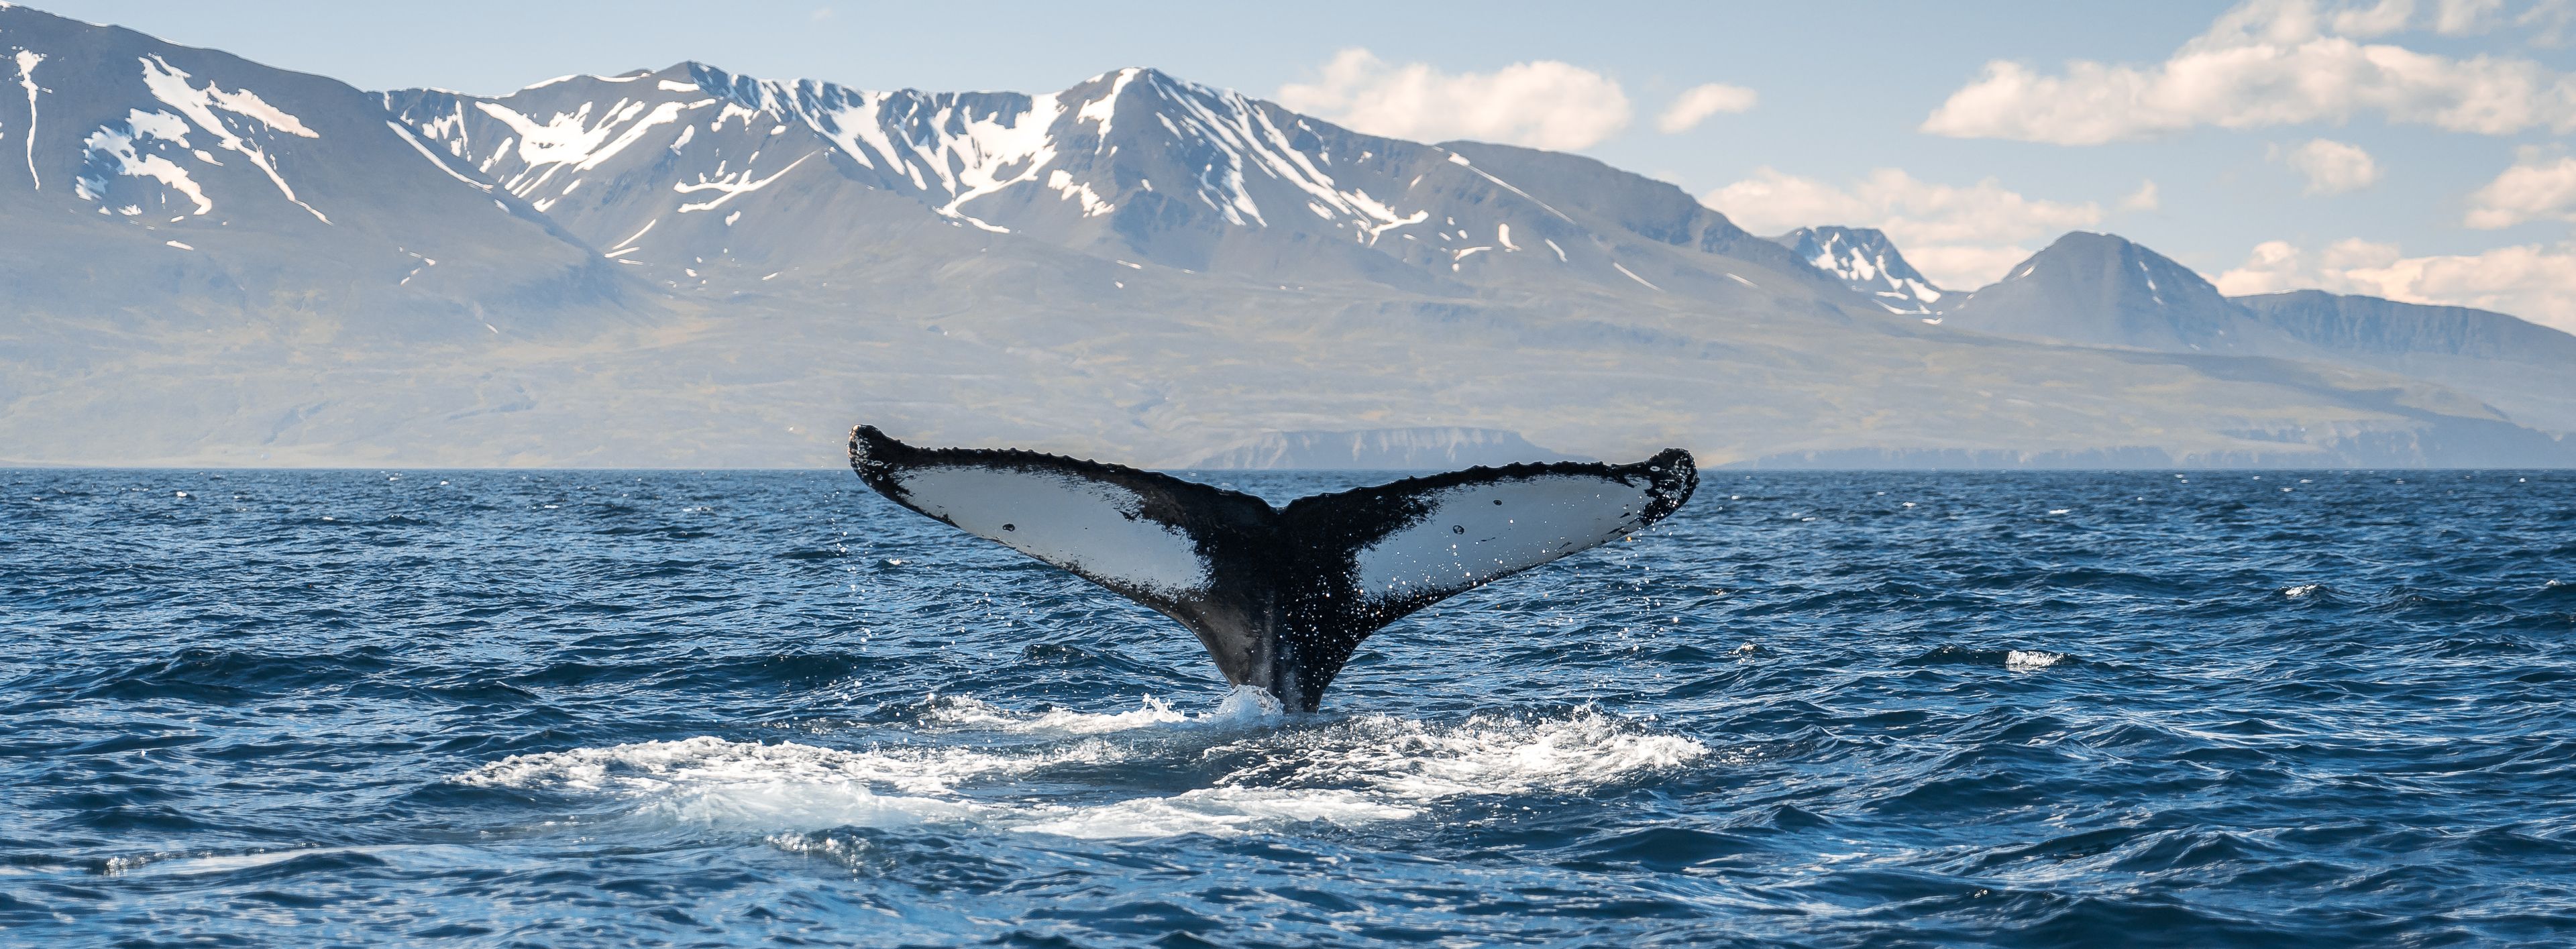 view on a whale tail in the Icelandic ocean, we see in background the snowy mountains of Iceland 